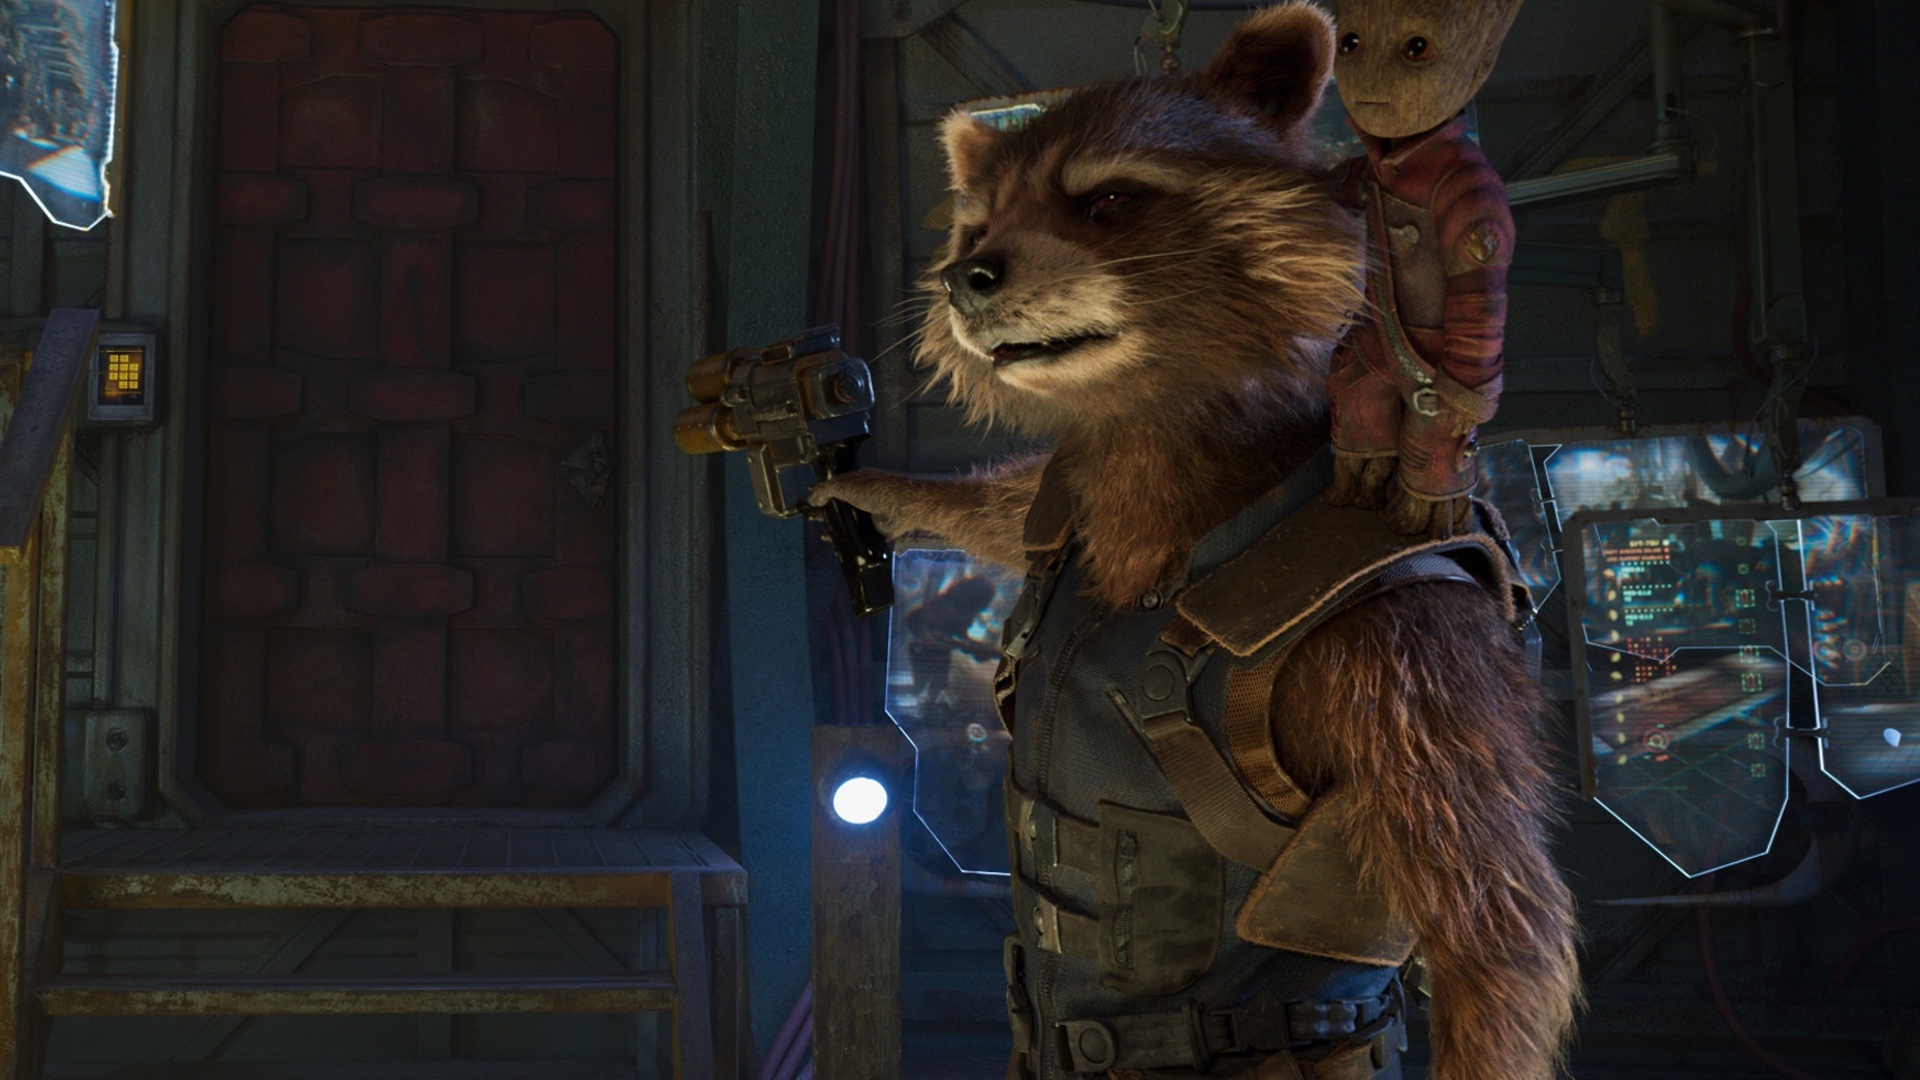 Guardians Of The Galaxy vol 3 Rocket Racoon release date spoilers